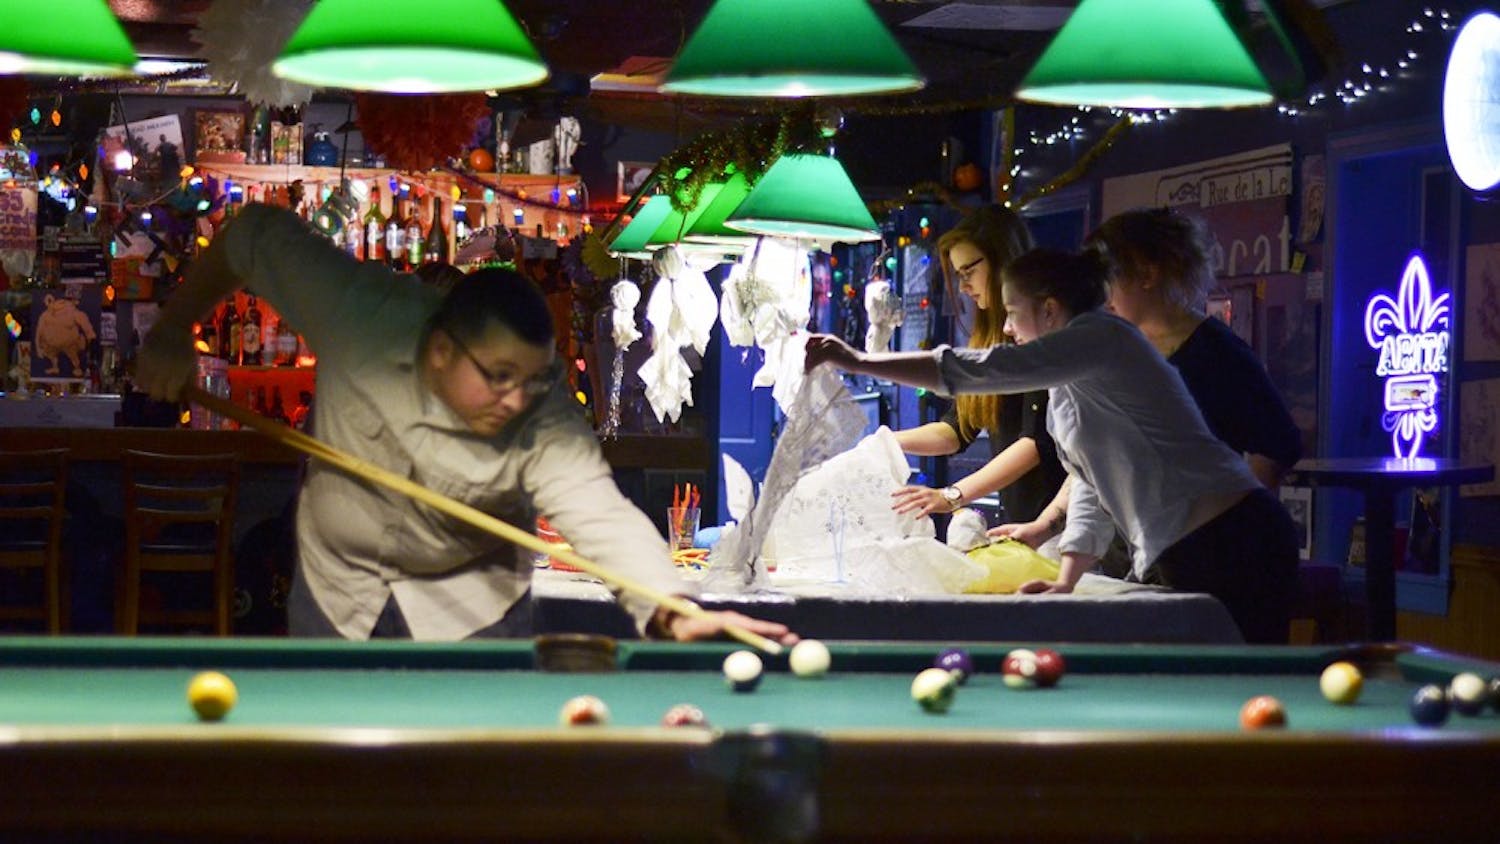 Bars that apply to be "private clubs" do not have to get sanitation inspections. Zog's Art Bar and Pool Hall is a private club on Henderson Street.